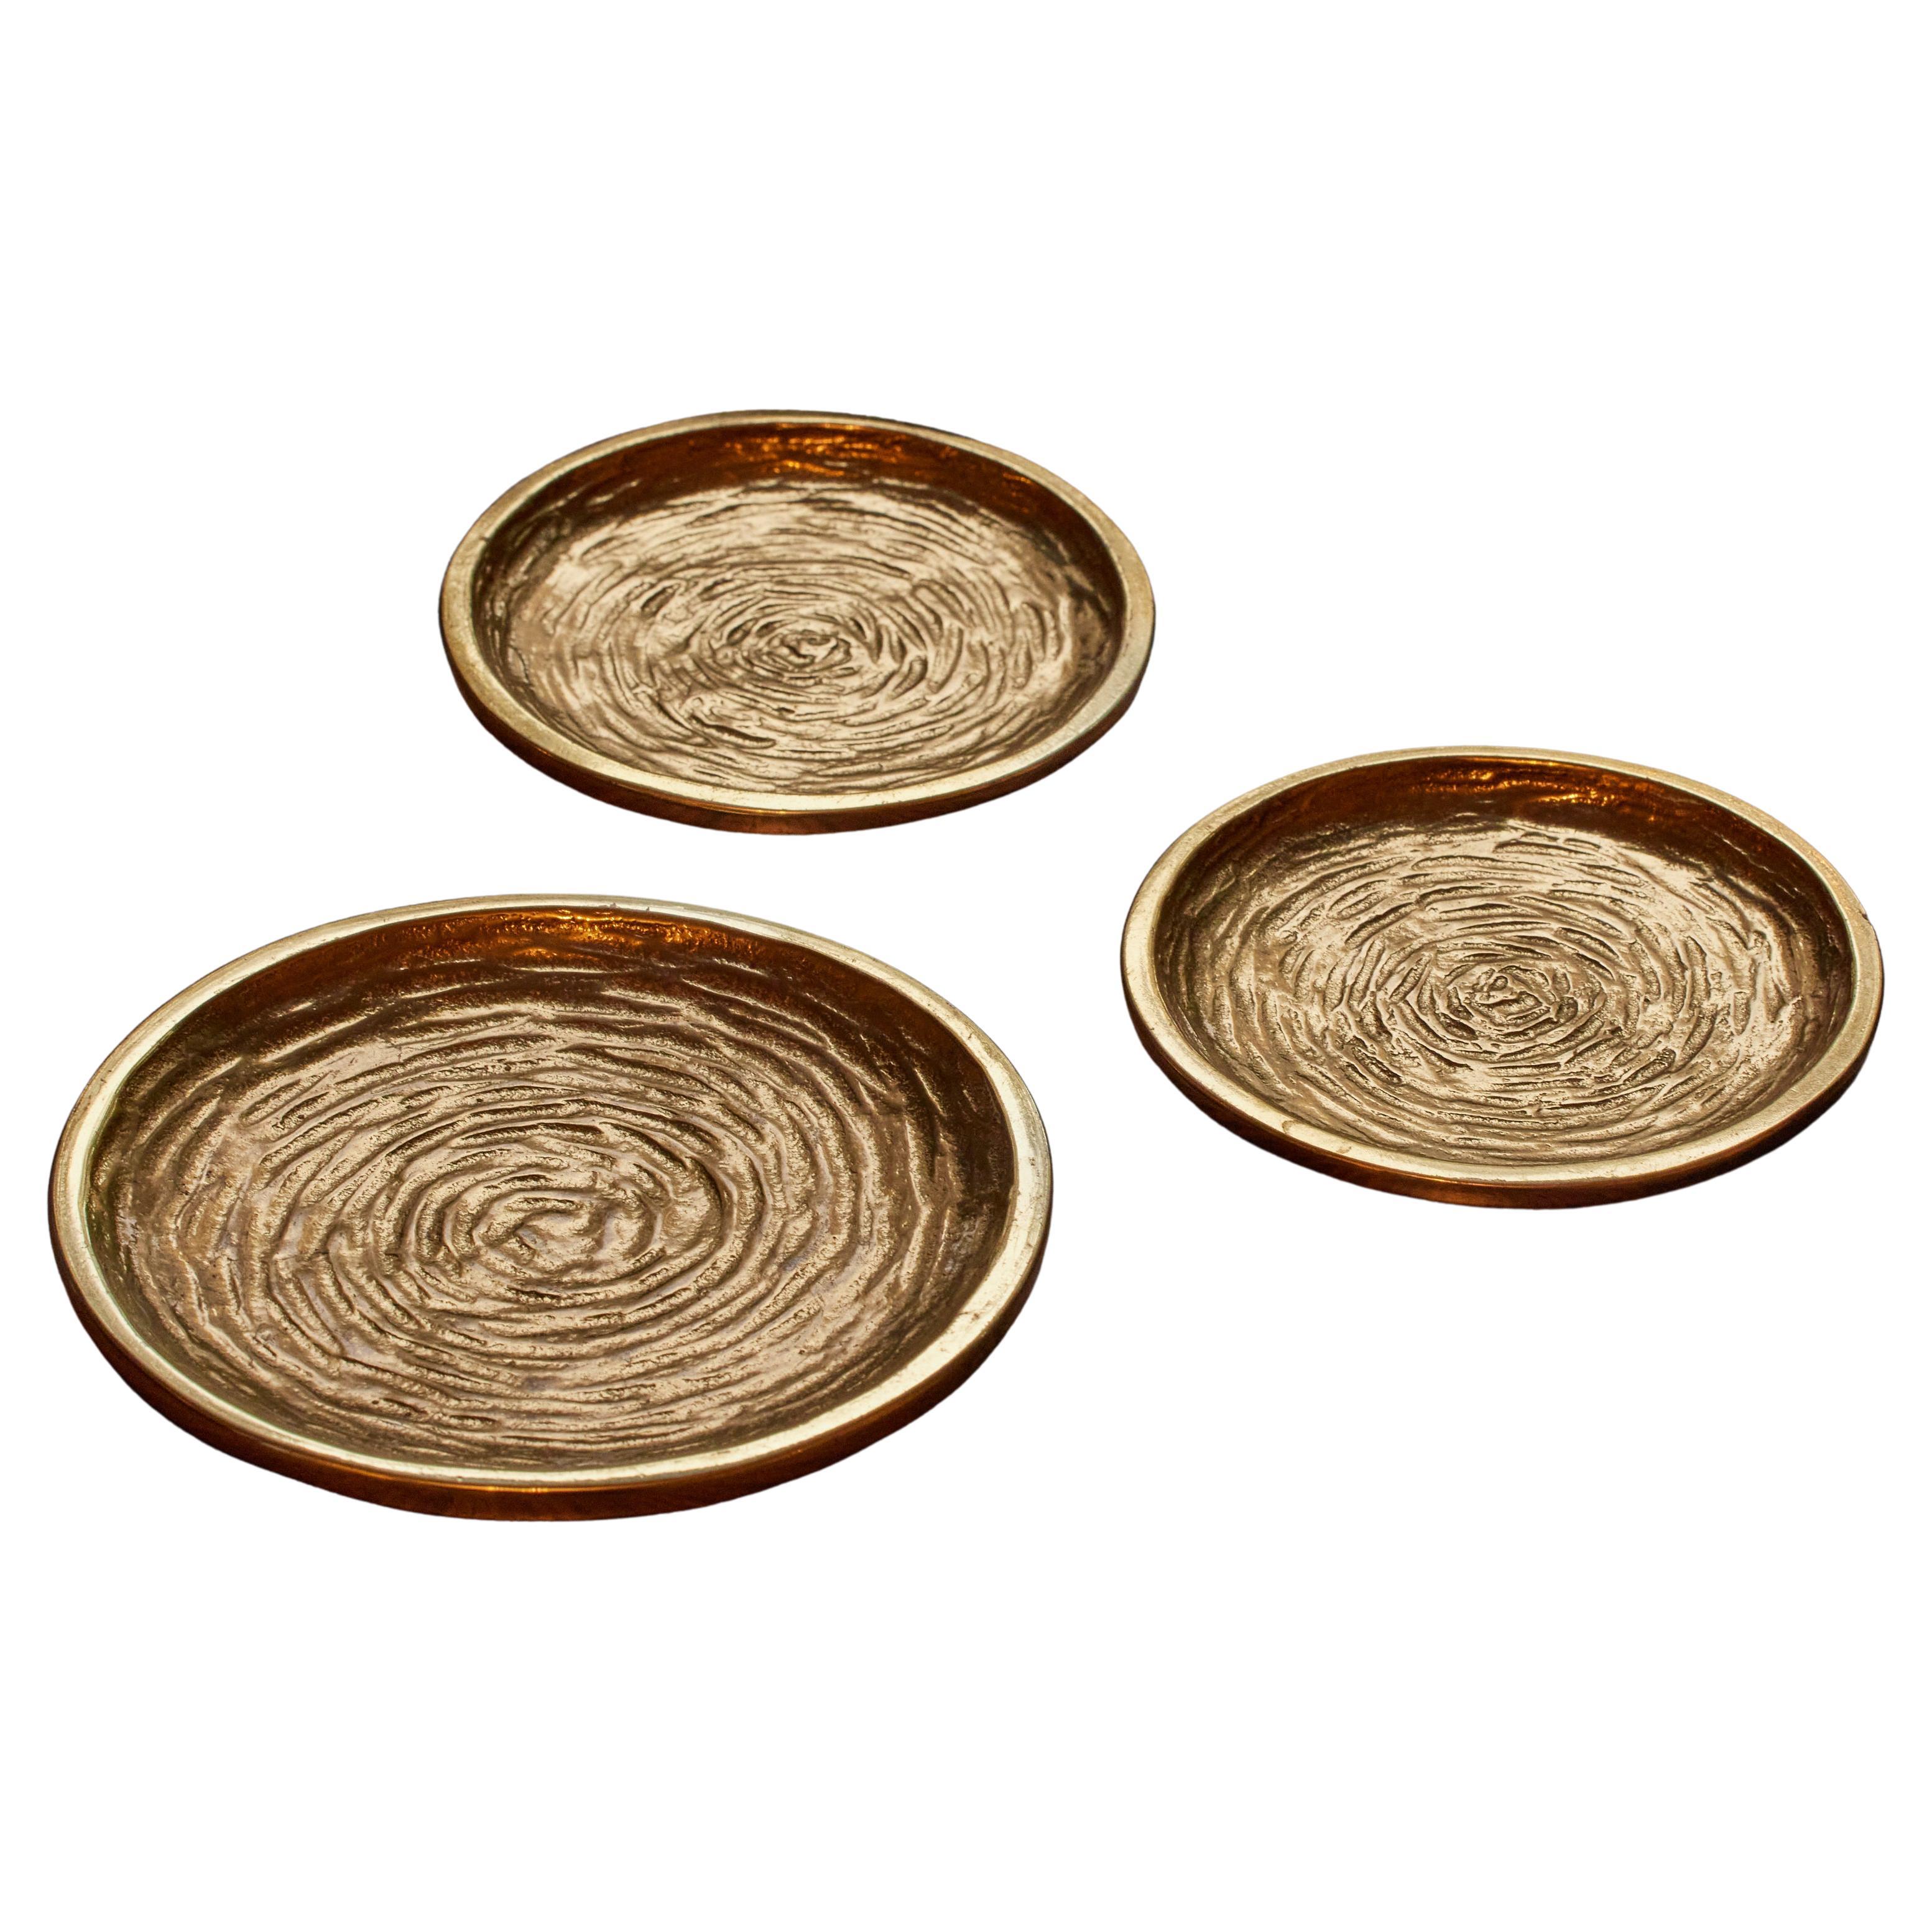 Ado Chale Style Set of 3 Plates in Patinated Brass 1970s